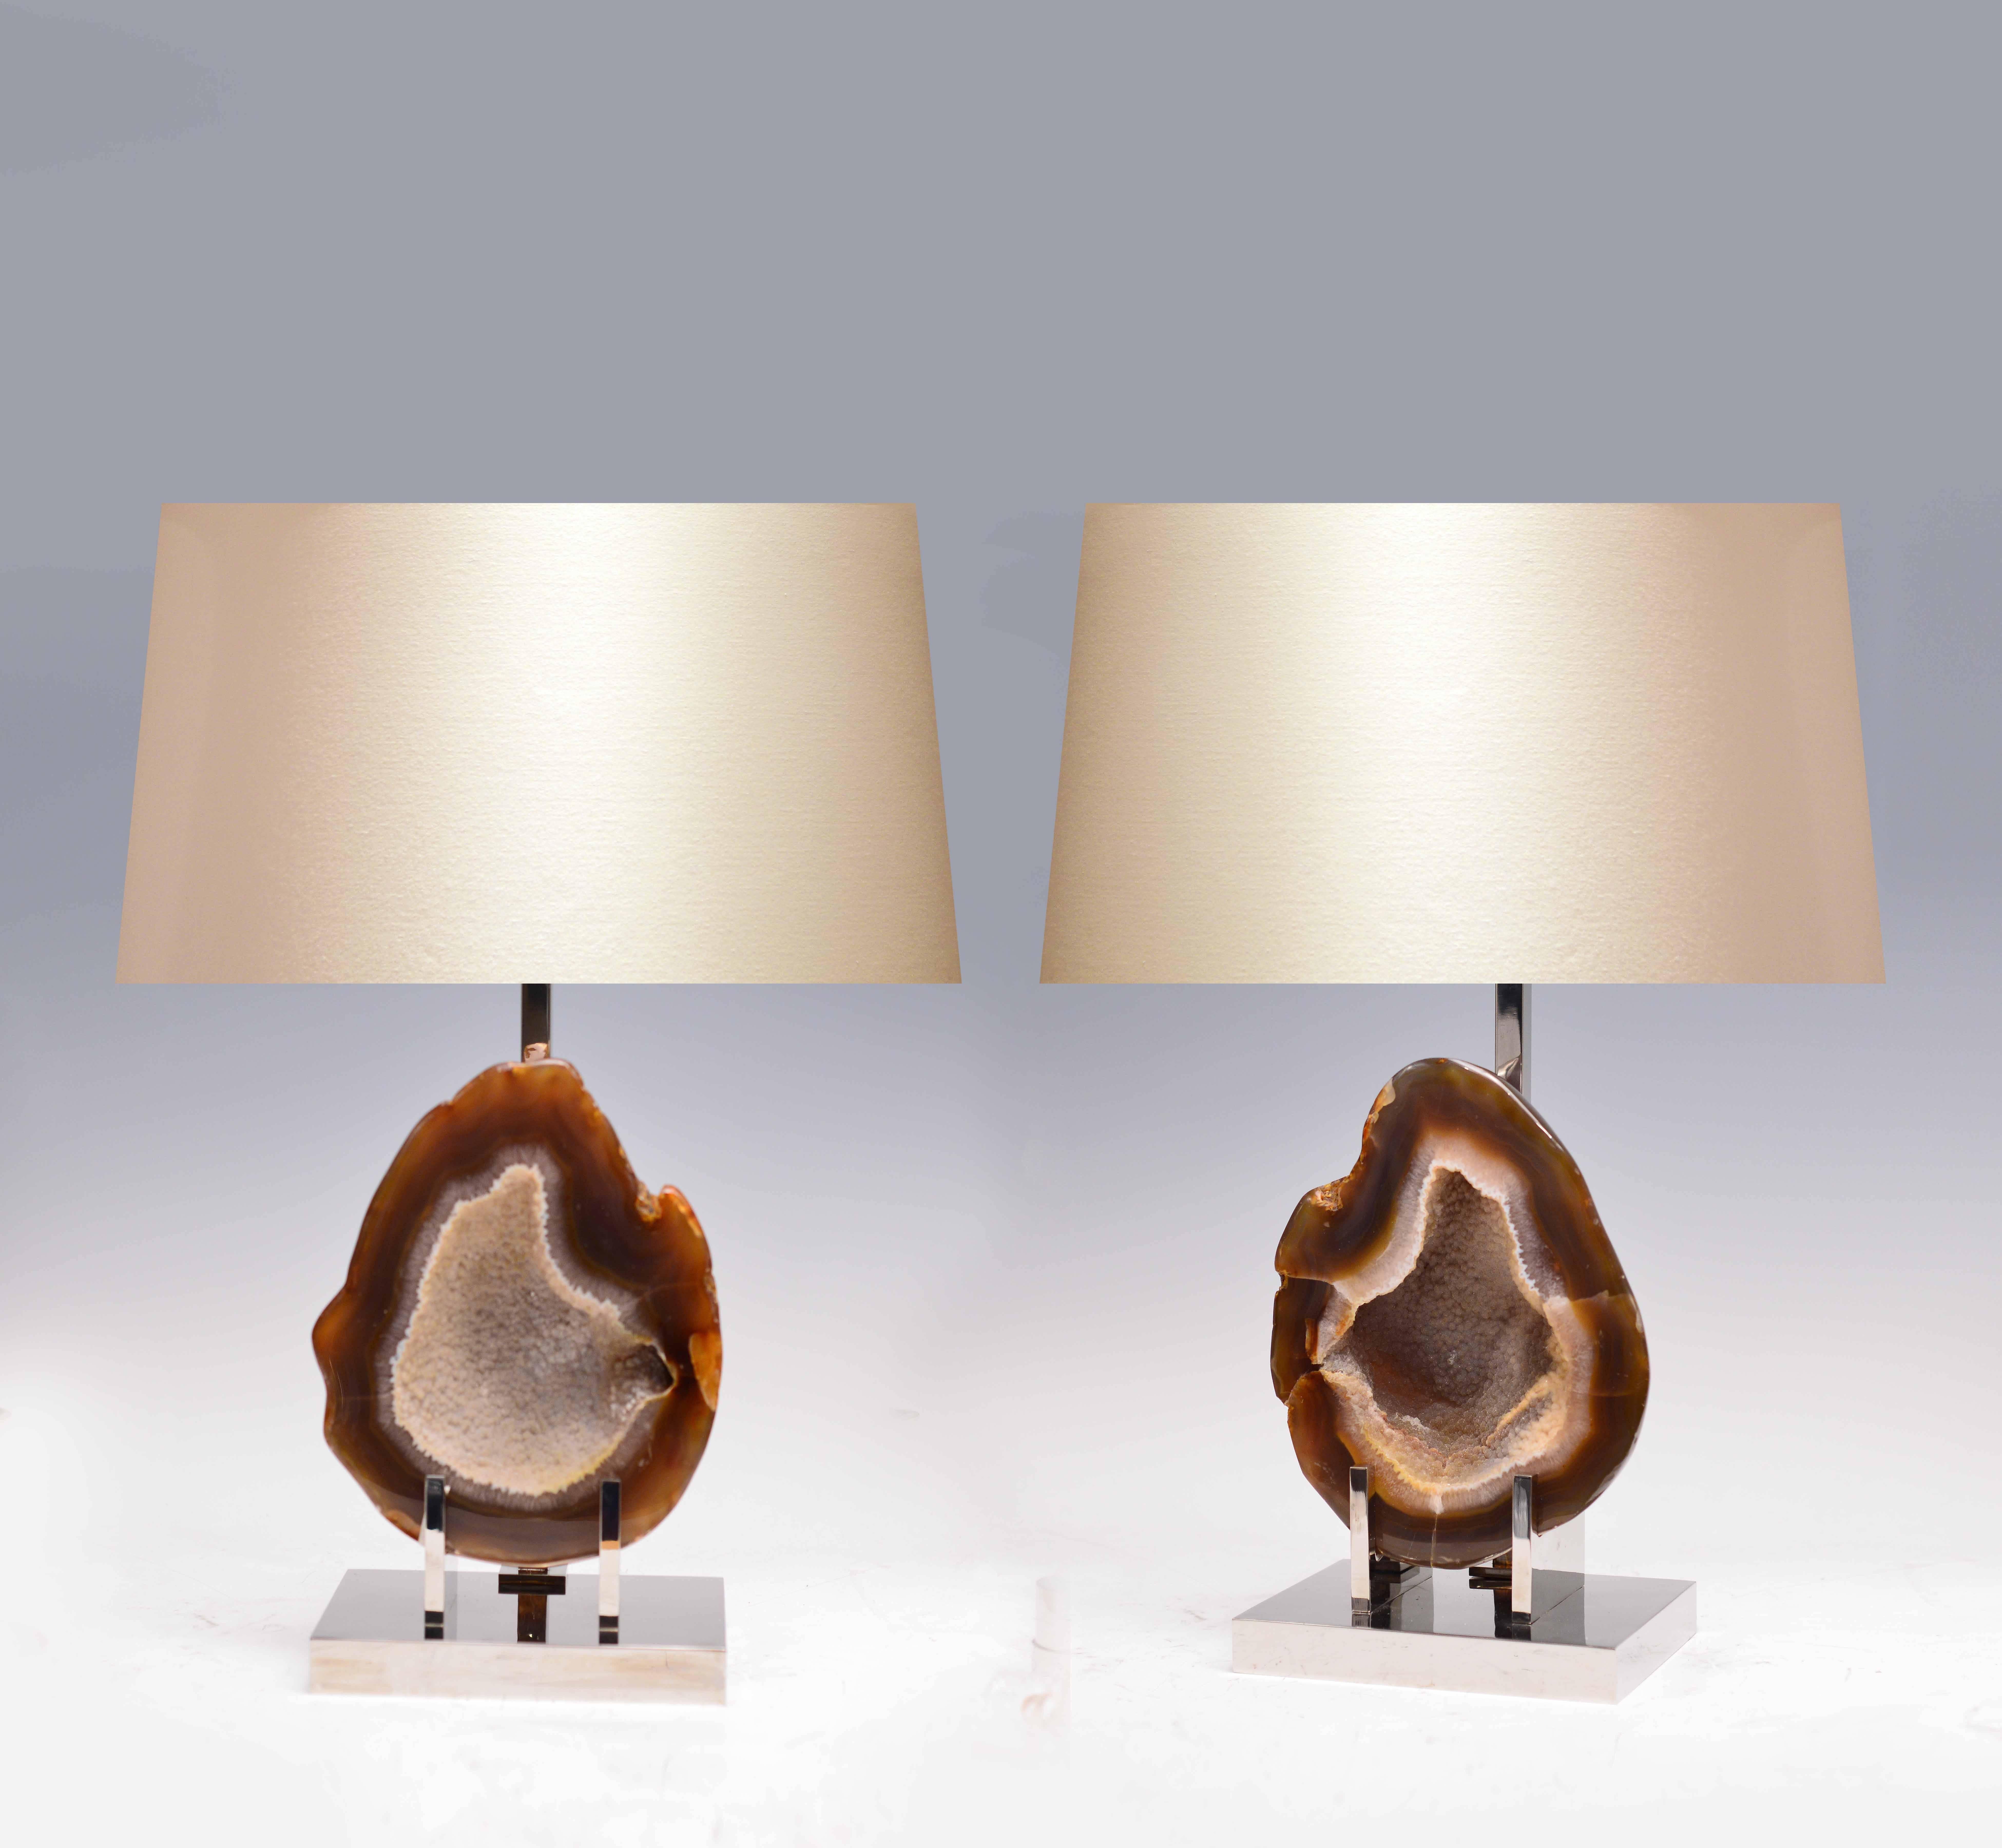 Pair of rare natural agate mount as lamps with nickel-plating stand, created by Phoenix Gallery.
(Lampshade not included)
